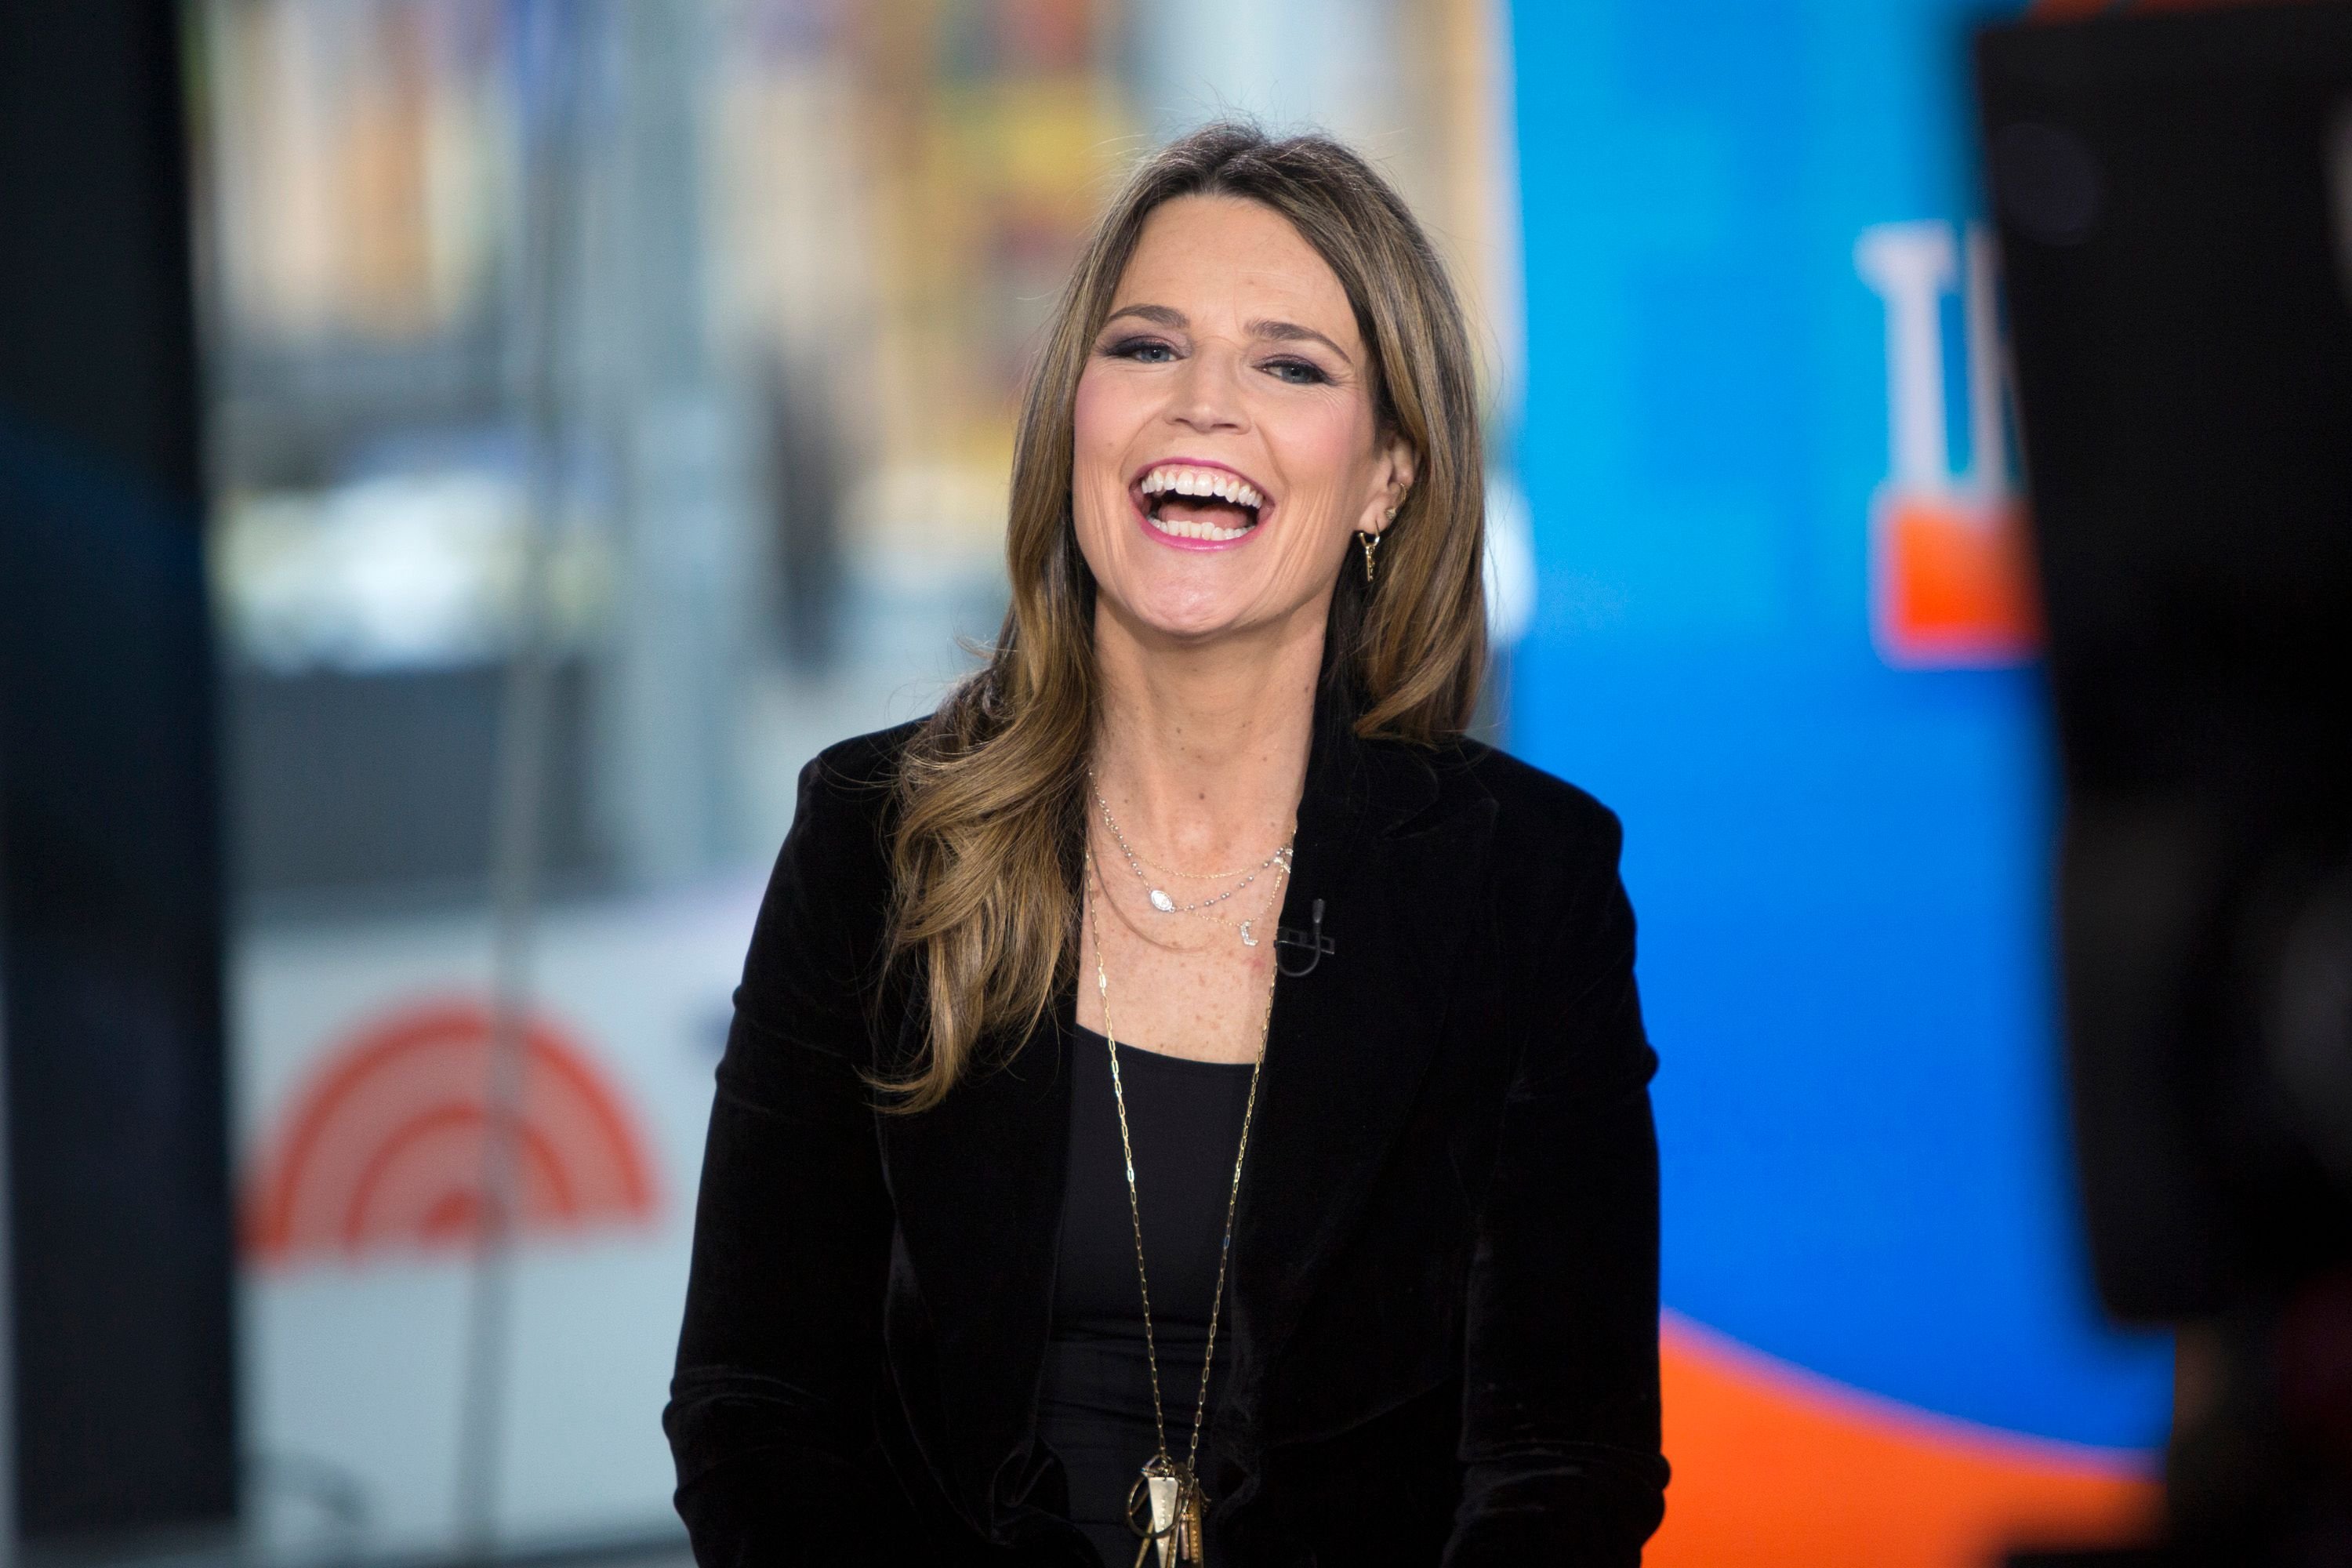 Savannah Guthrie on the set of the "Today" show on January 9, 2018 | Photo: Zach Pagano/NBCU Photo Bank/NBCUniversal/Getty Images